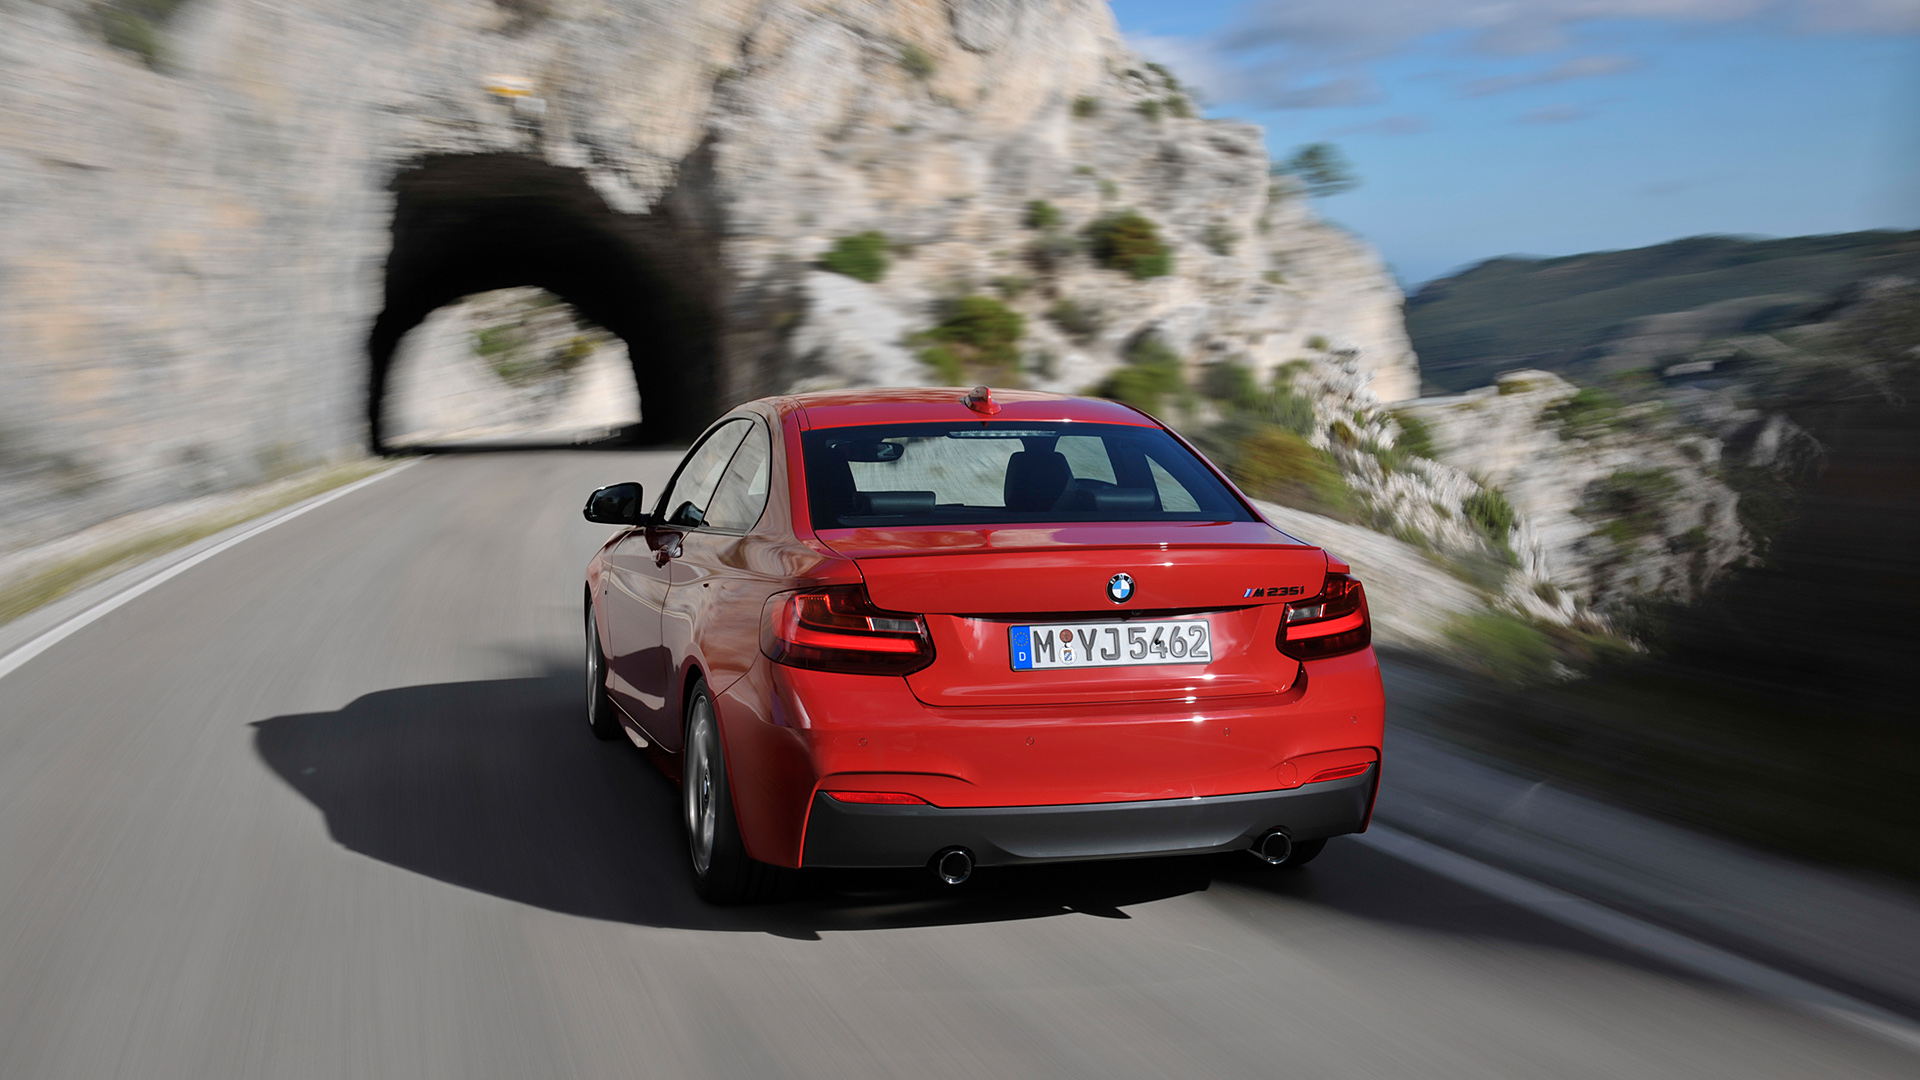  2014 BMW M235i Coupe Wallpaper.